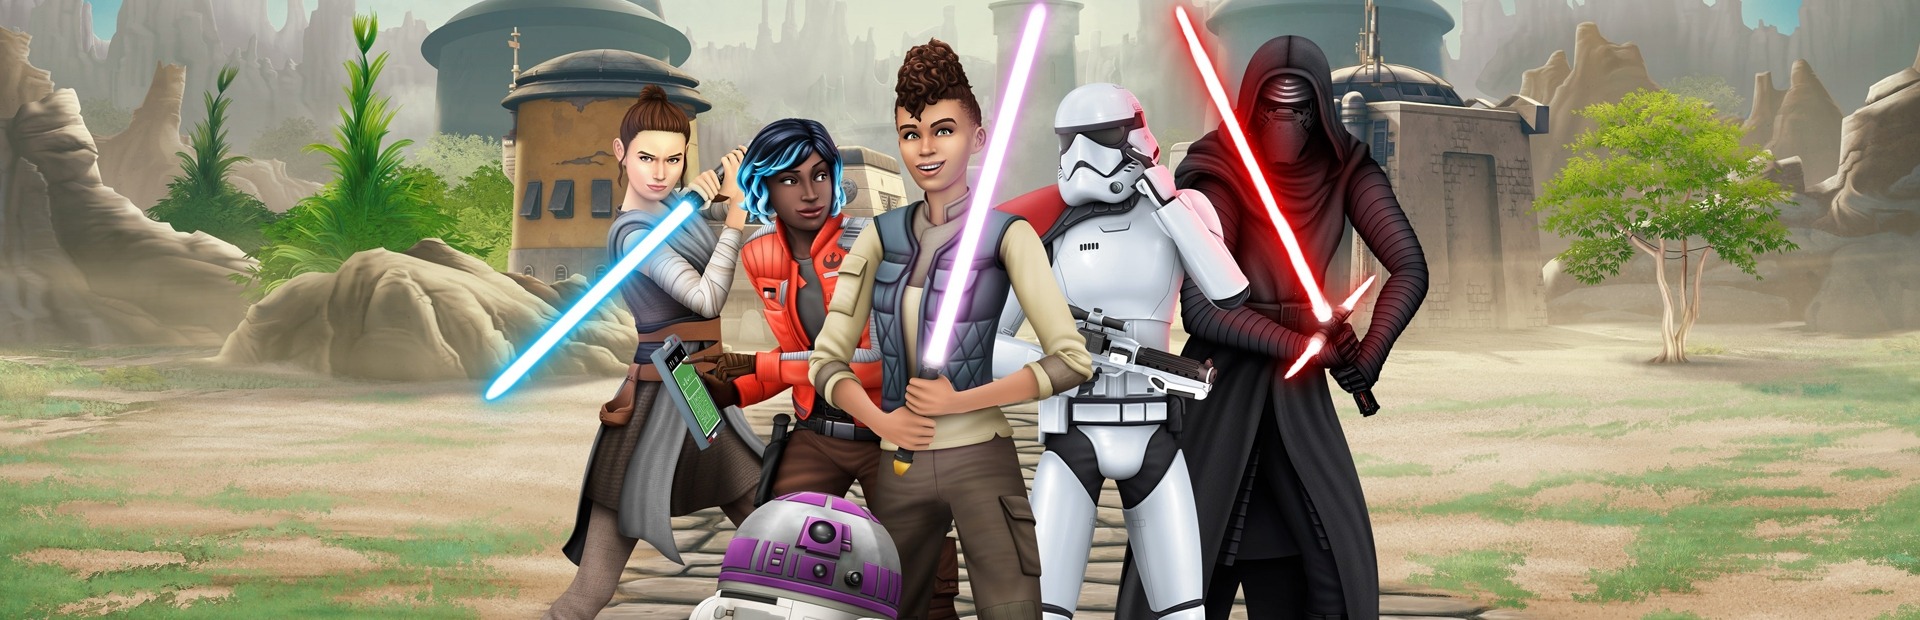 The Sims 4 Star Wars: Journey to Batuu PS4